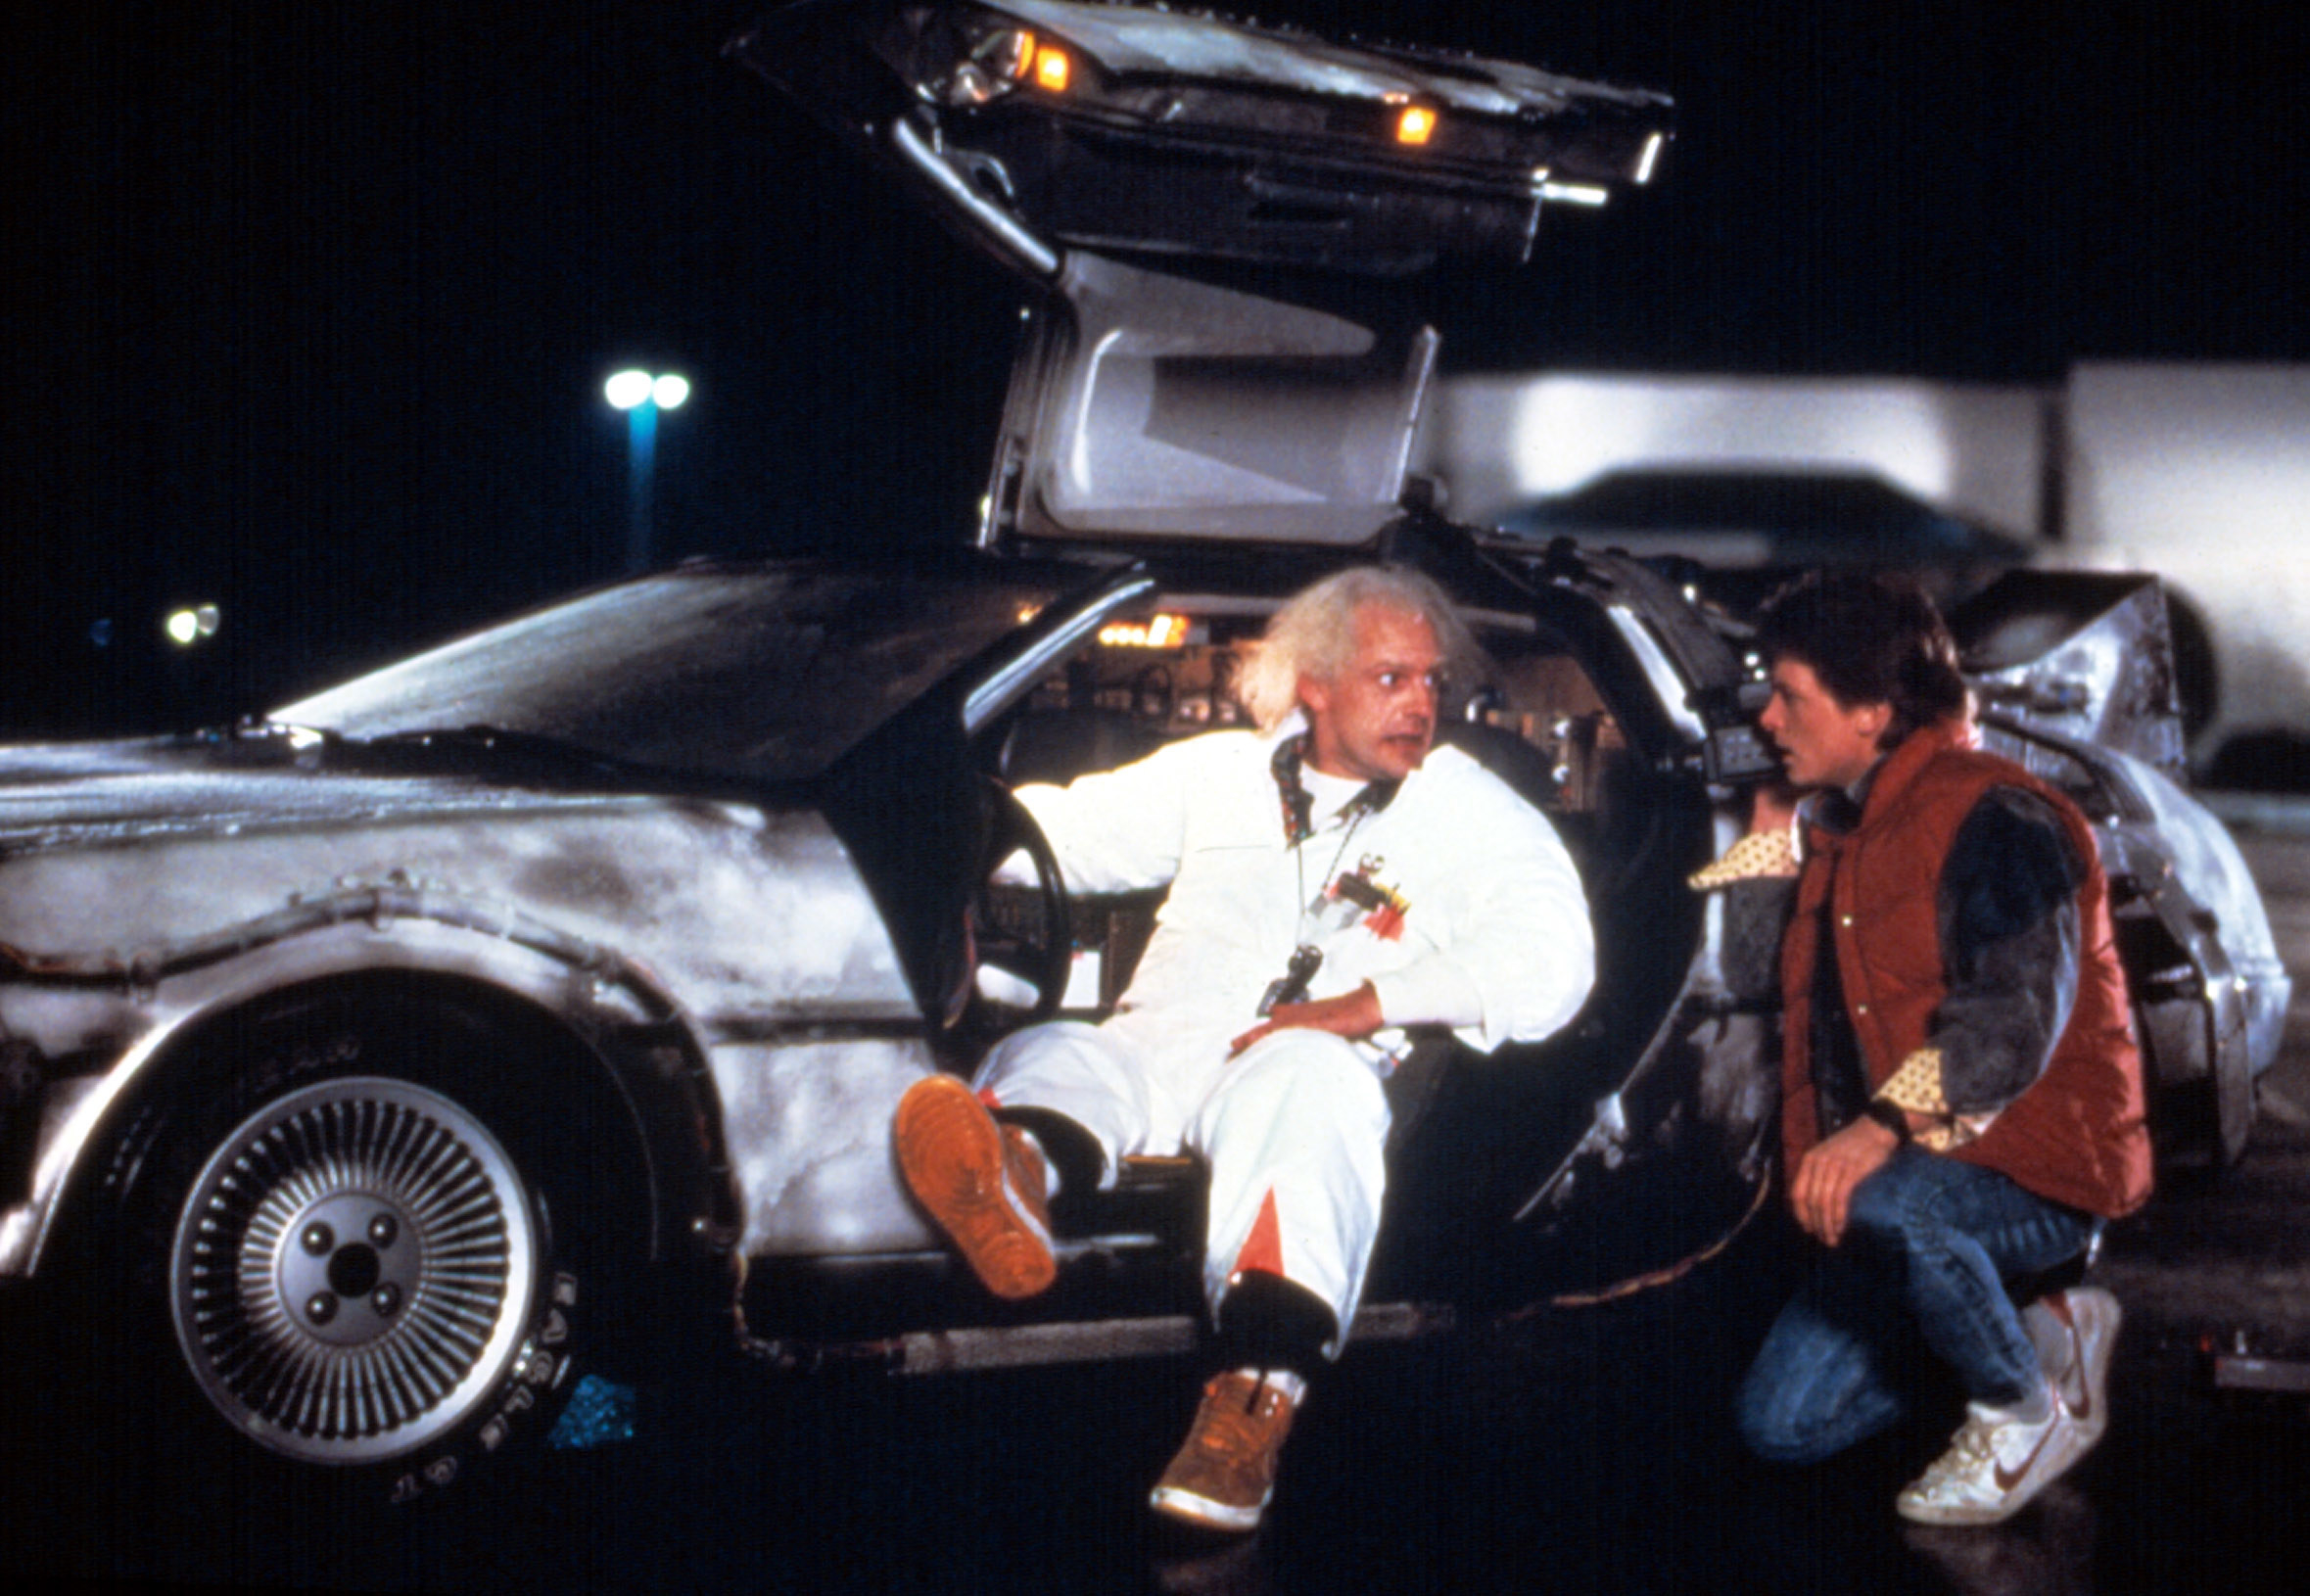 Doc sitting in the DeLorean time machine and Marty recording him with a VHS camcorder